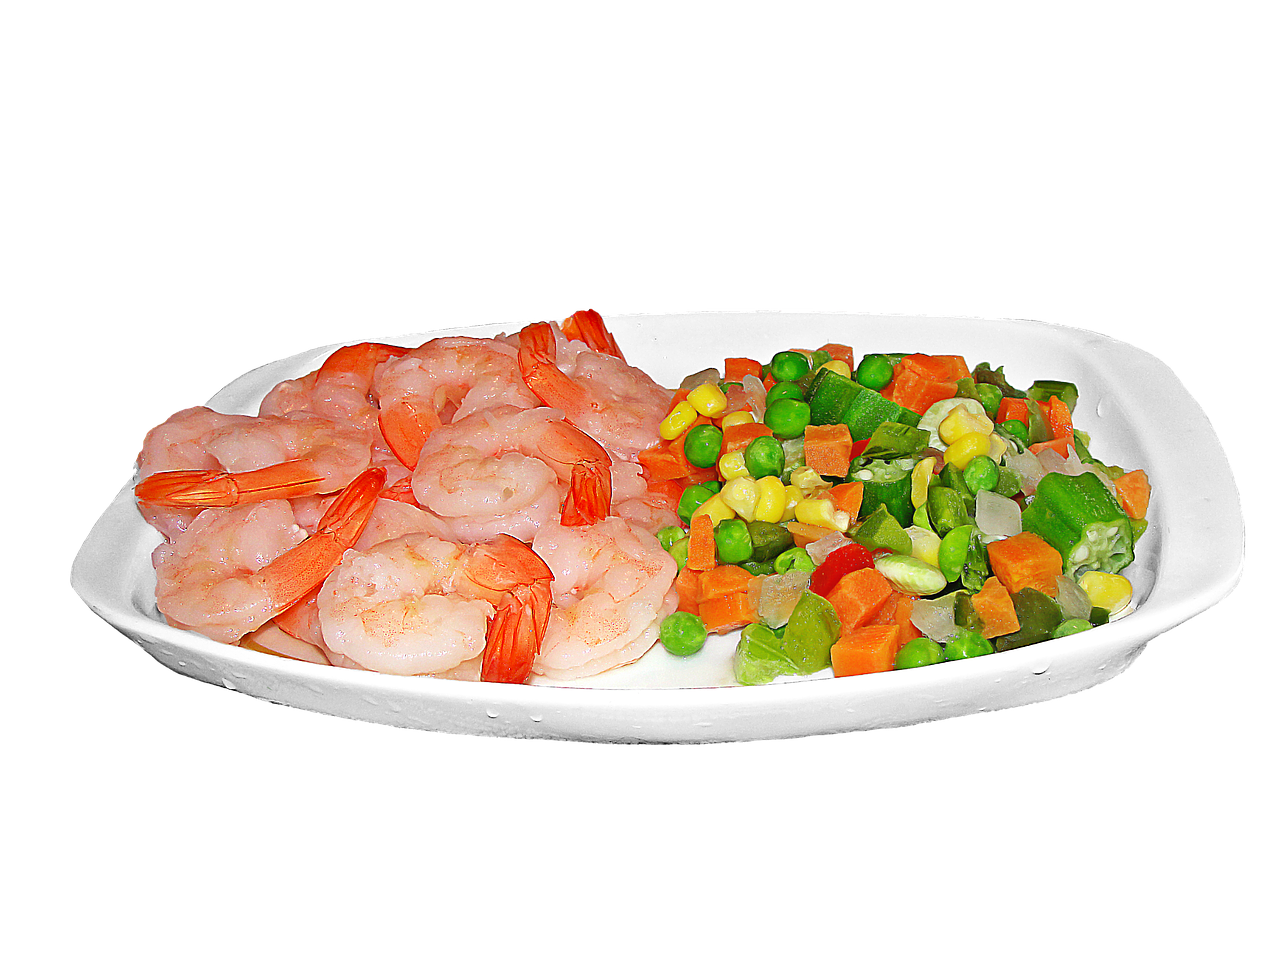 A Plate Of Shrimp And Vegetables